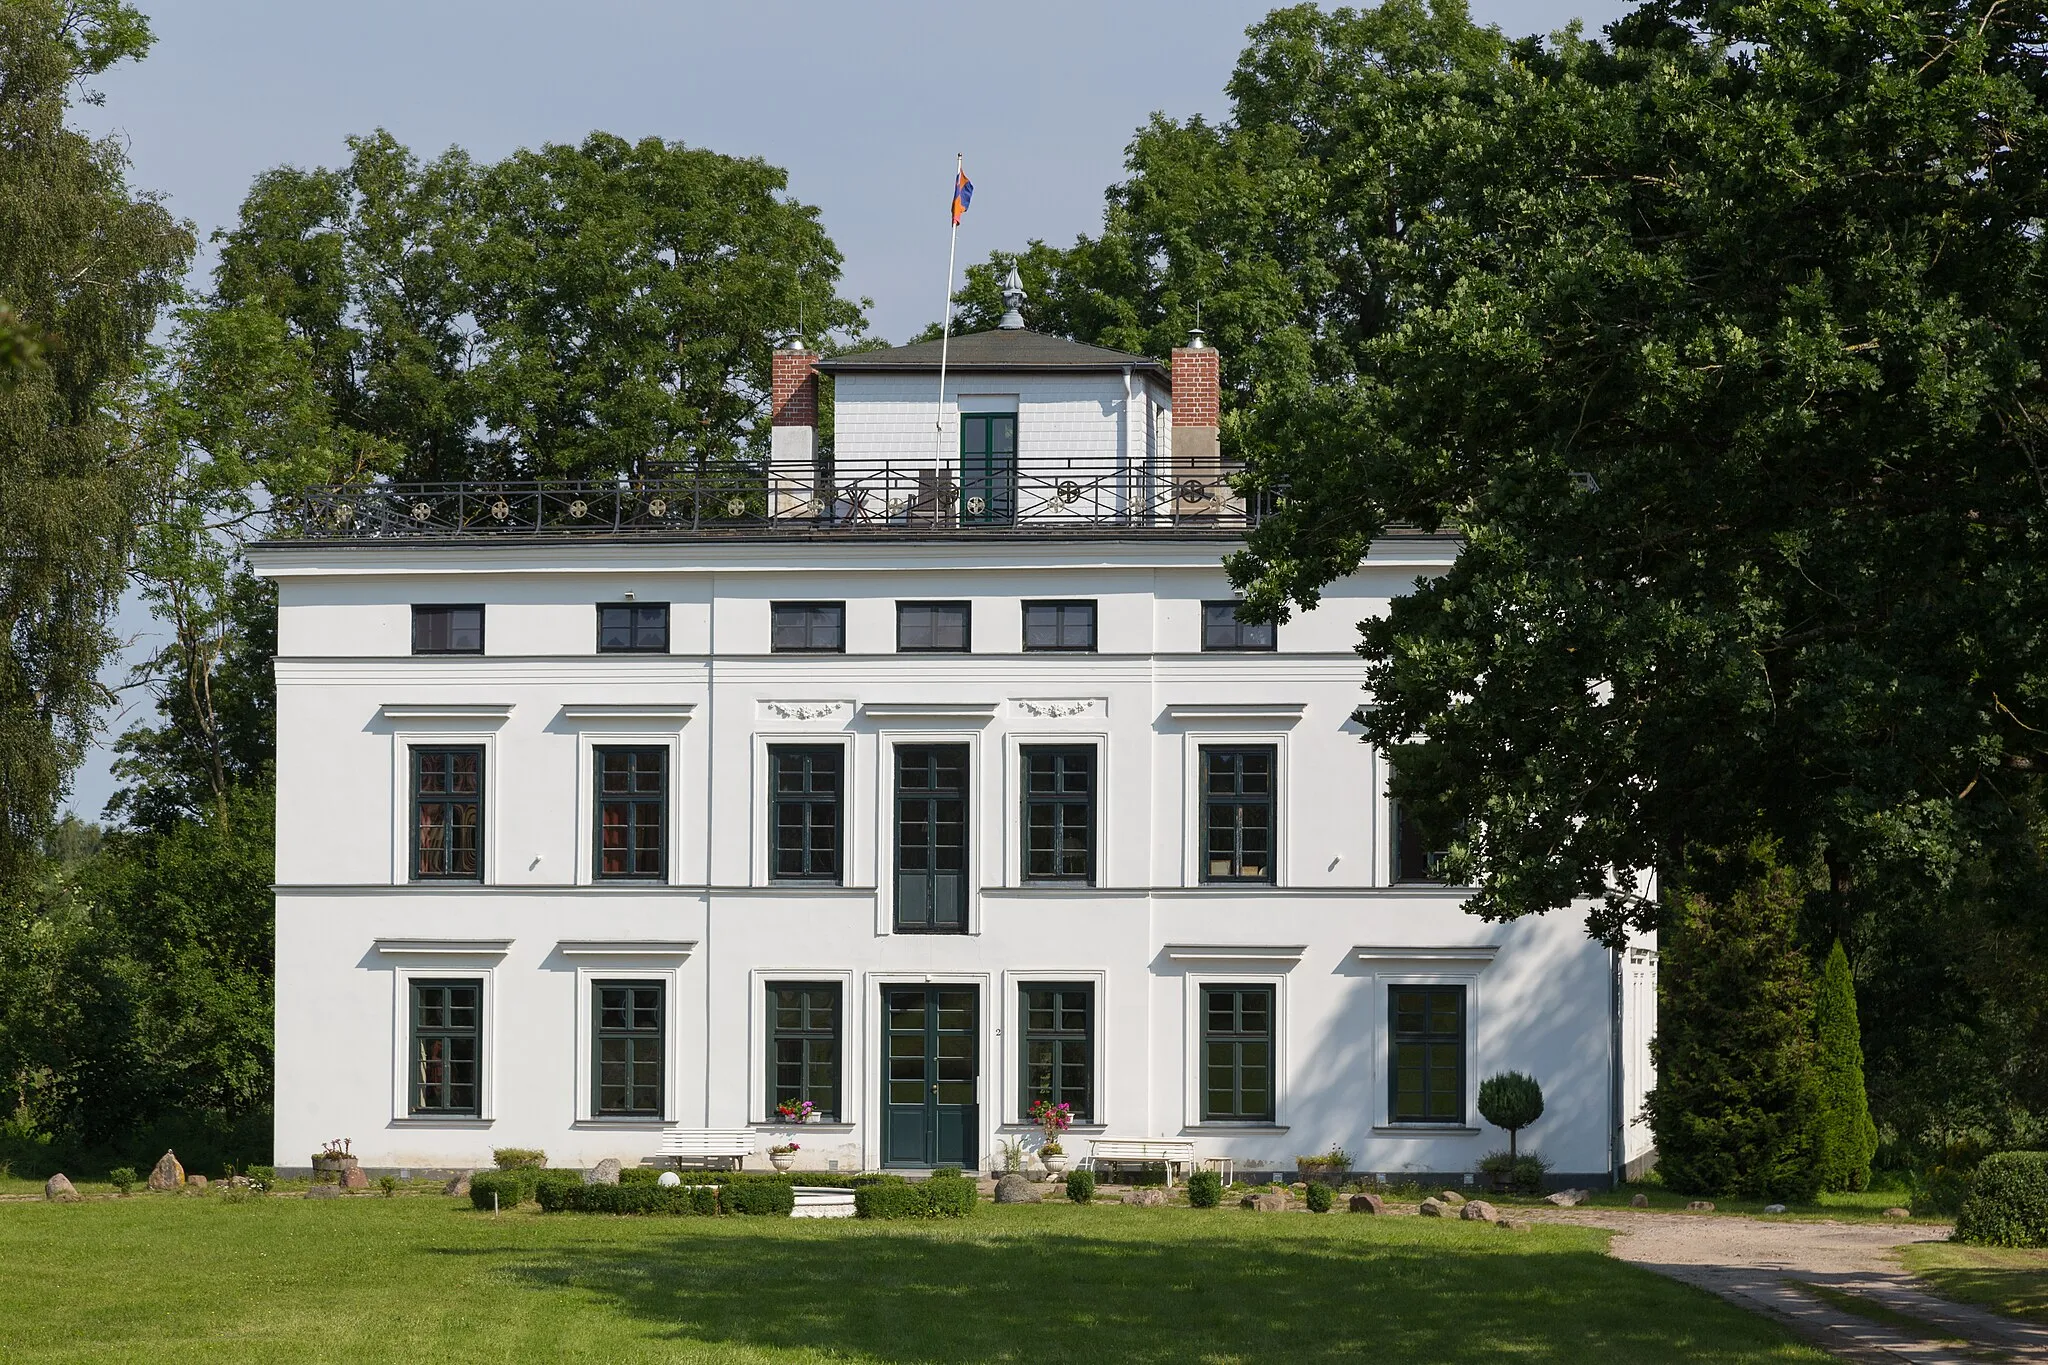 Photo showing: Westenbrügge Manor House (Gutshaus Westenbrügge) in Westenbrügge, district of Biendorf, Landkreis Rostock, Mecklenburg-Vorpommern, Germany. The building is a listed cultural heritage monument.